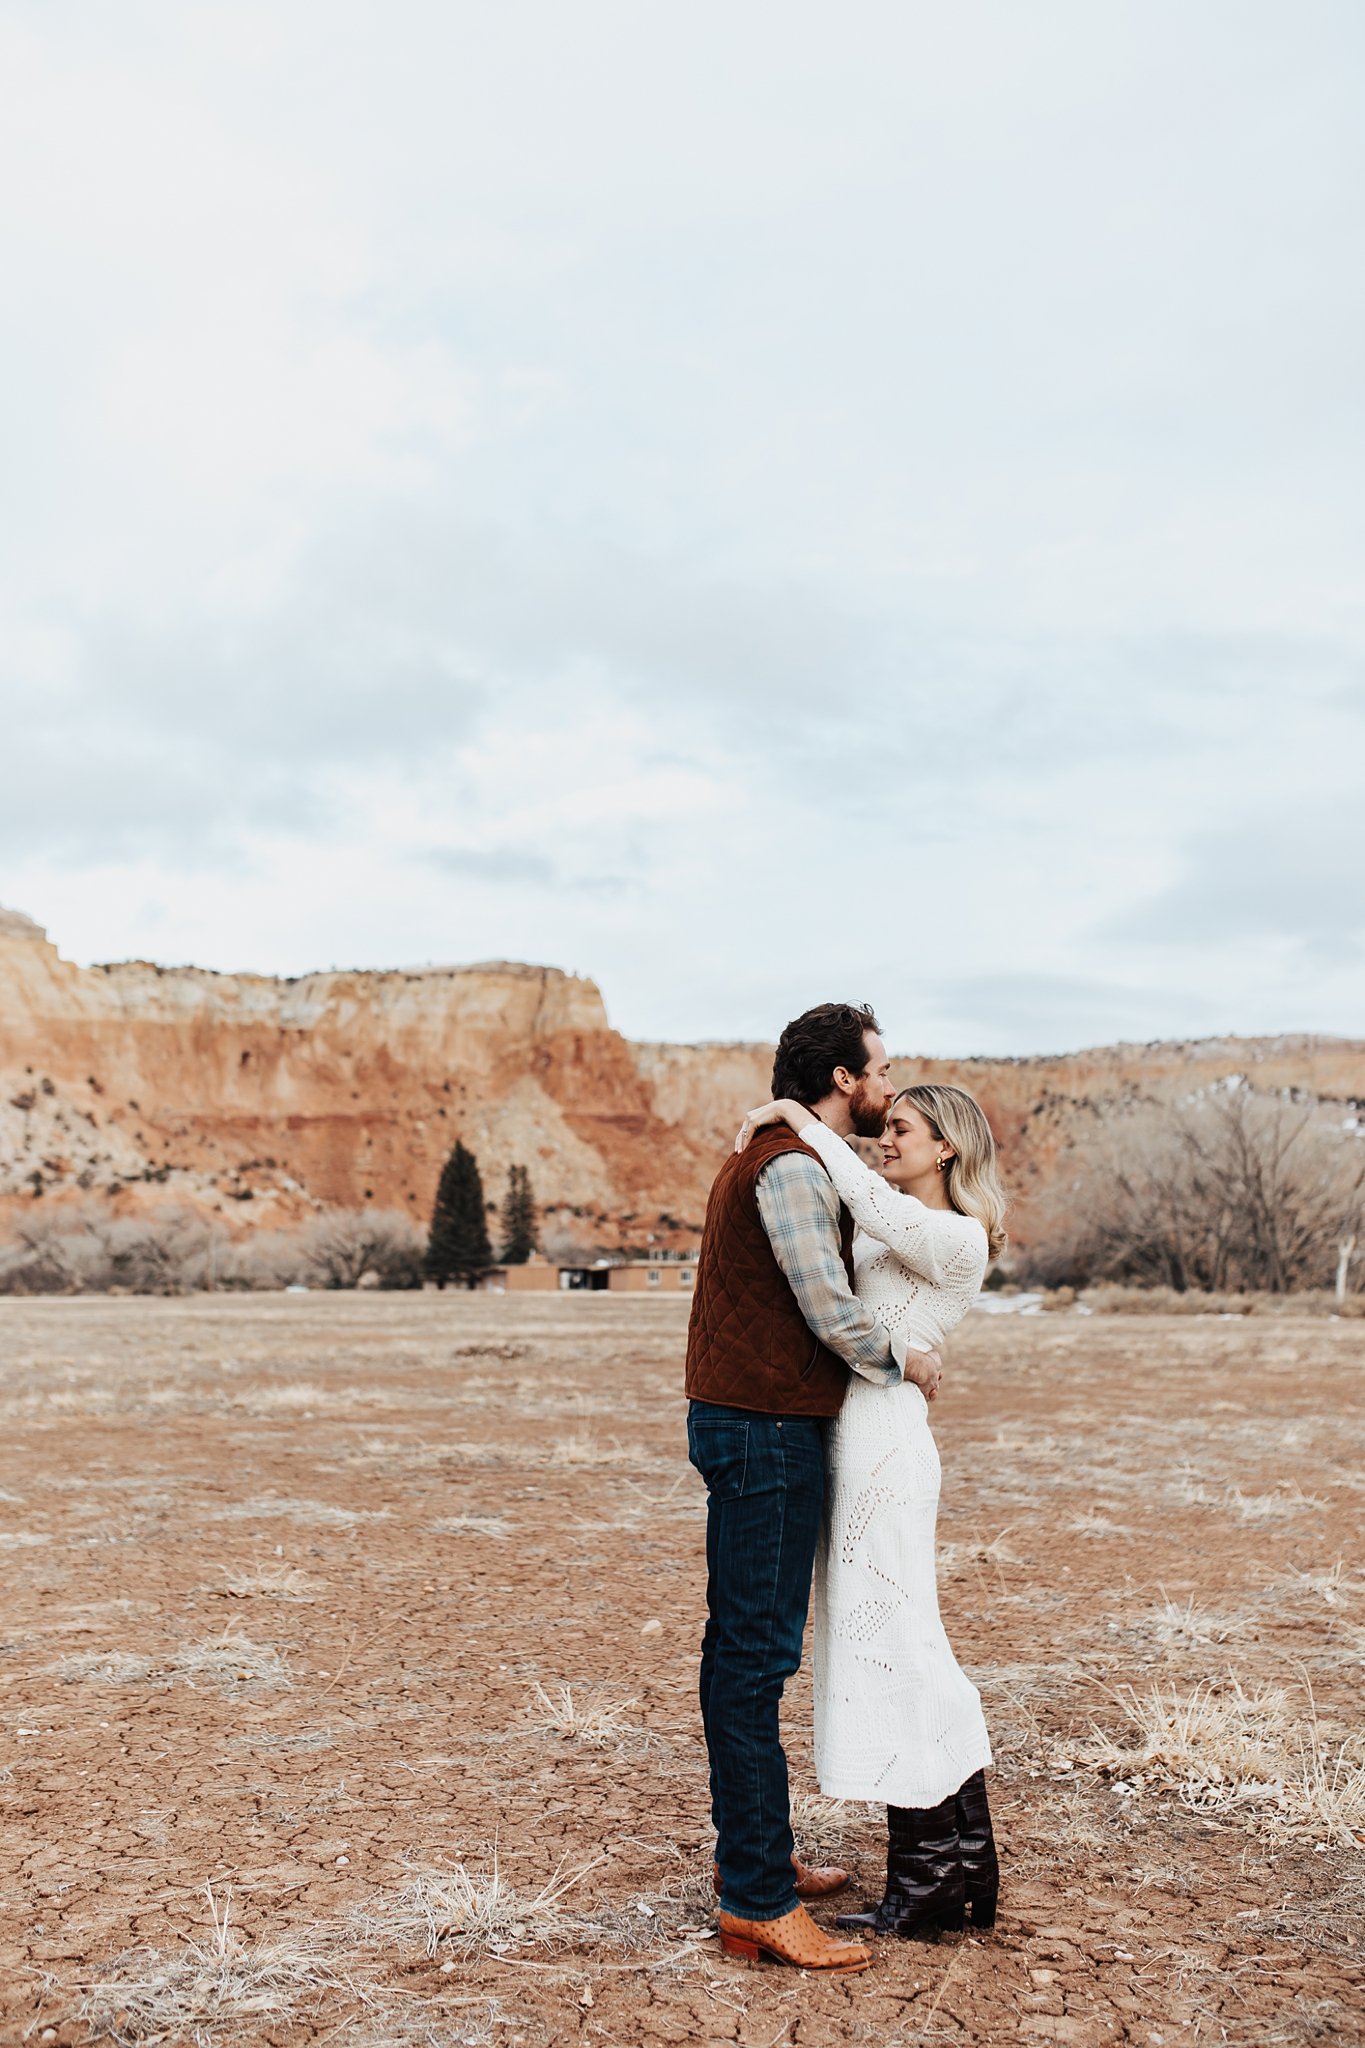 Alicia+lucia+photography+-+albuquerque+wedding+photographer+-+santa+fe+wedding+photography+-+new+mexico+wedding+photographer+-+new+mexico+wedding+-+southwest+engagement+-+ghost+ranch+engagement+-+ghost+ranch+wedding_0009.jpg